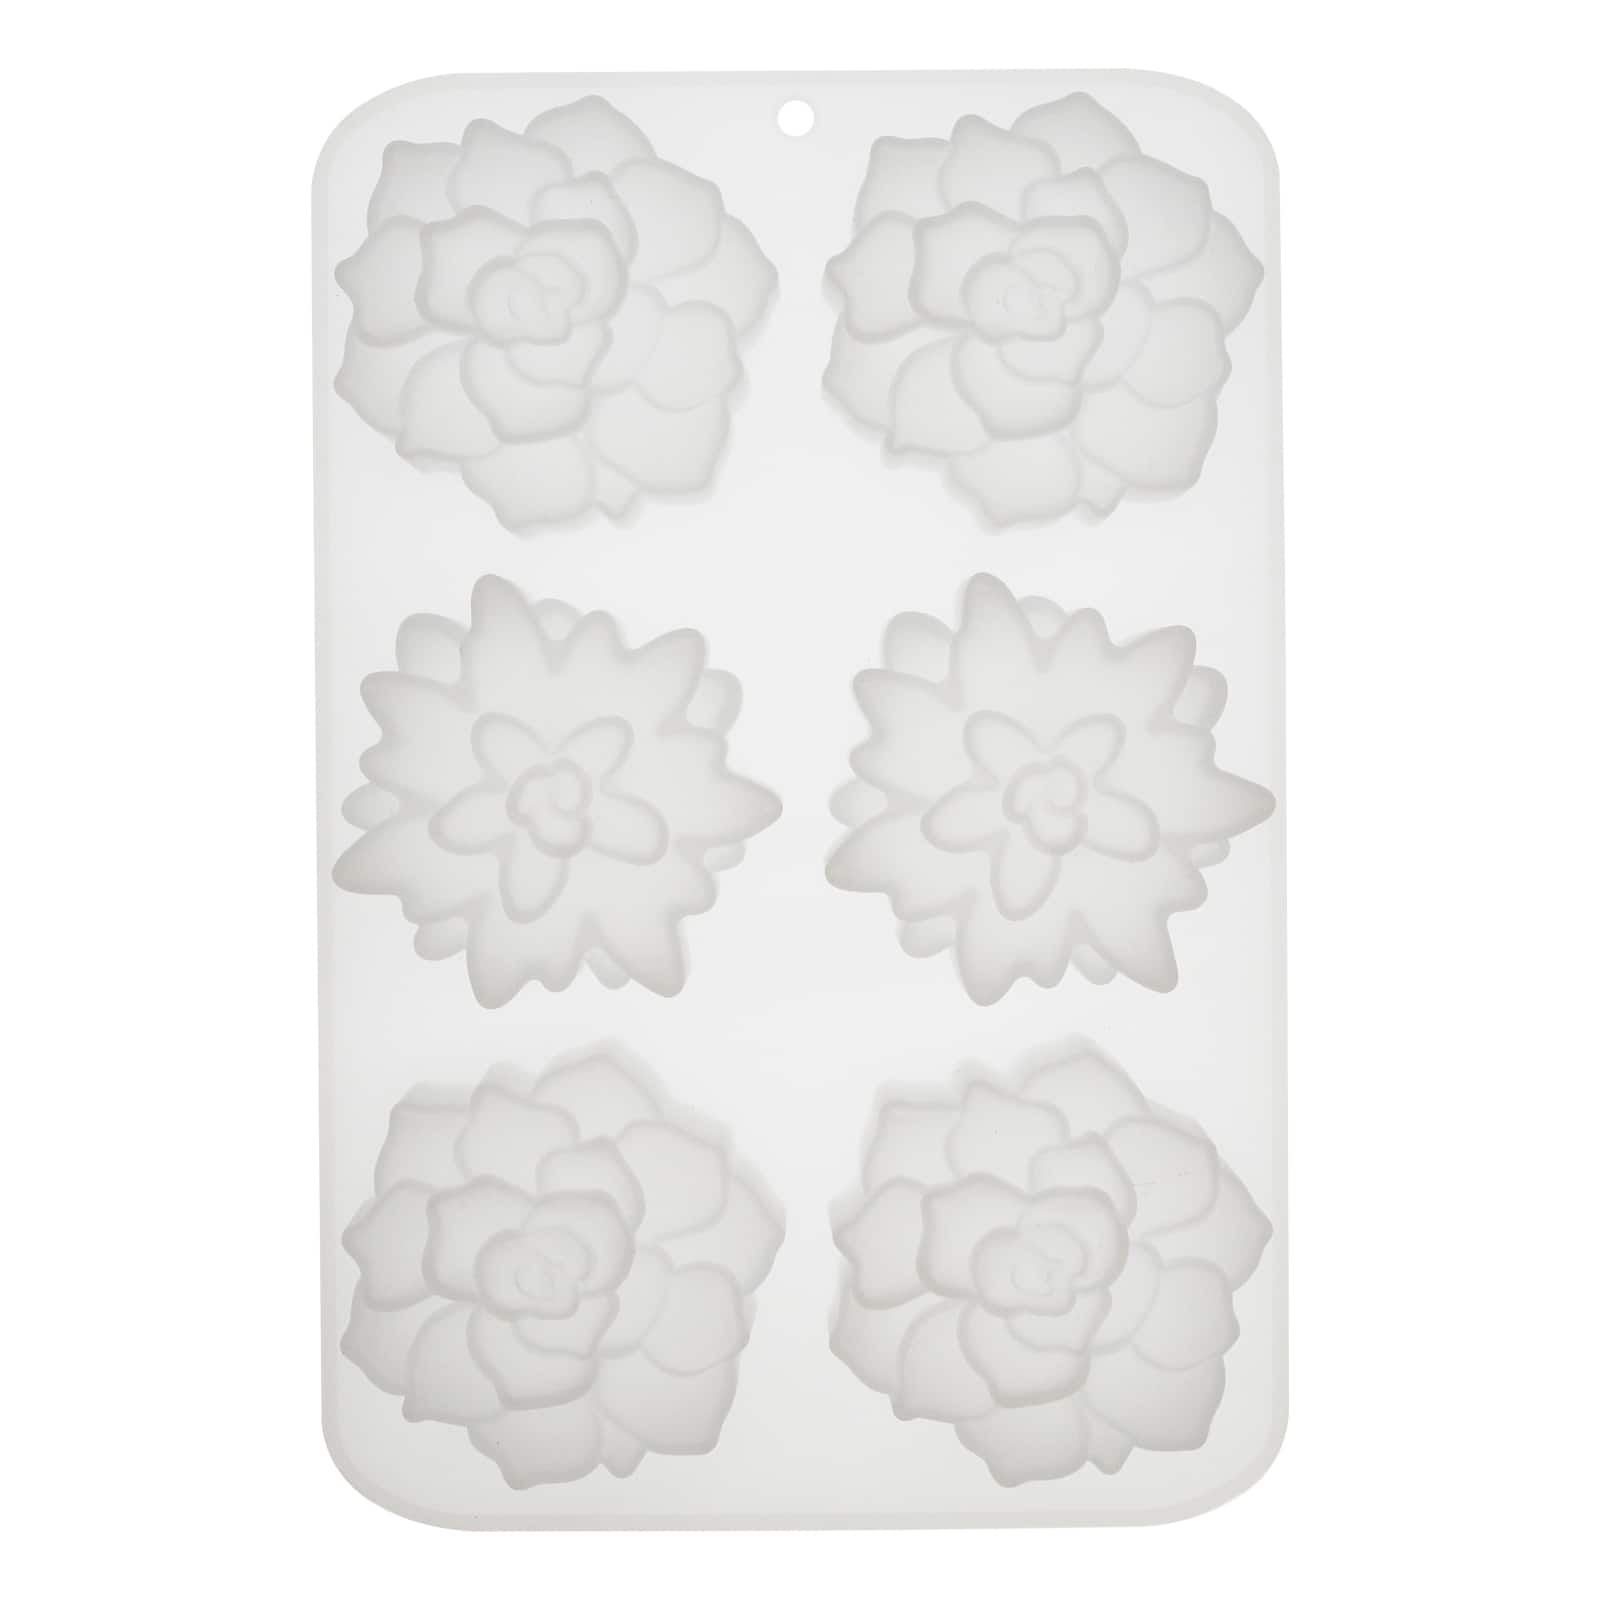 Bramble Berry 4 Cavity Snowflake Silicone Mold in White | 7 x 7 x 1.5 | Michaels